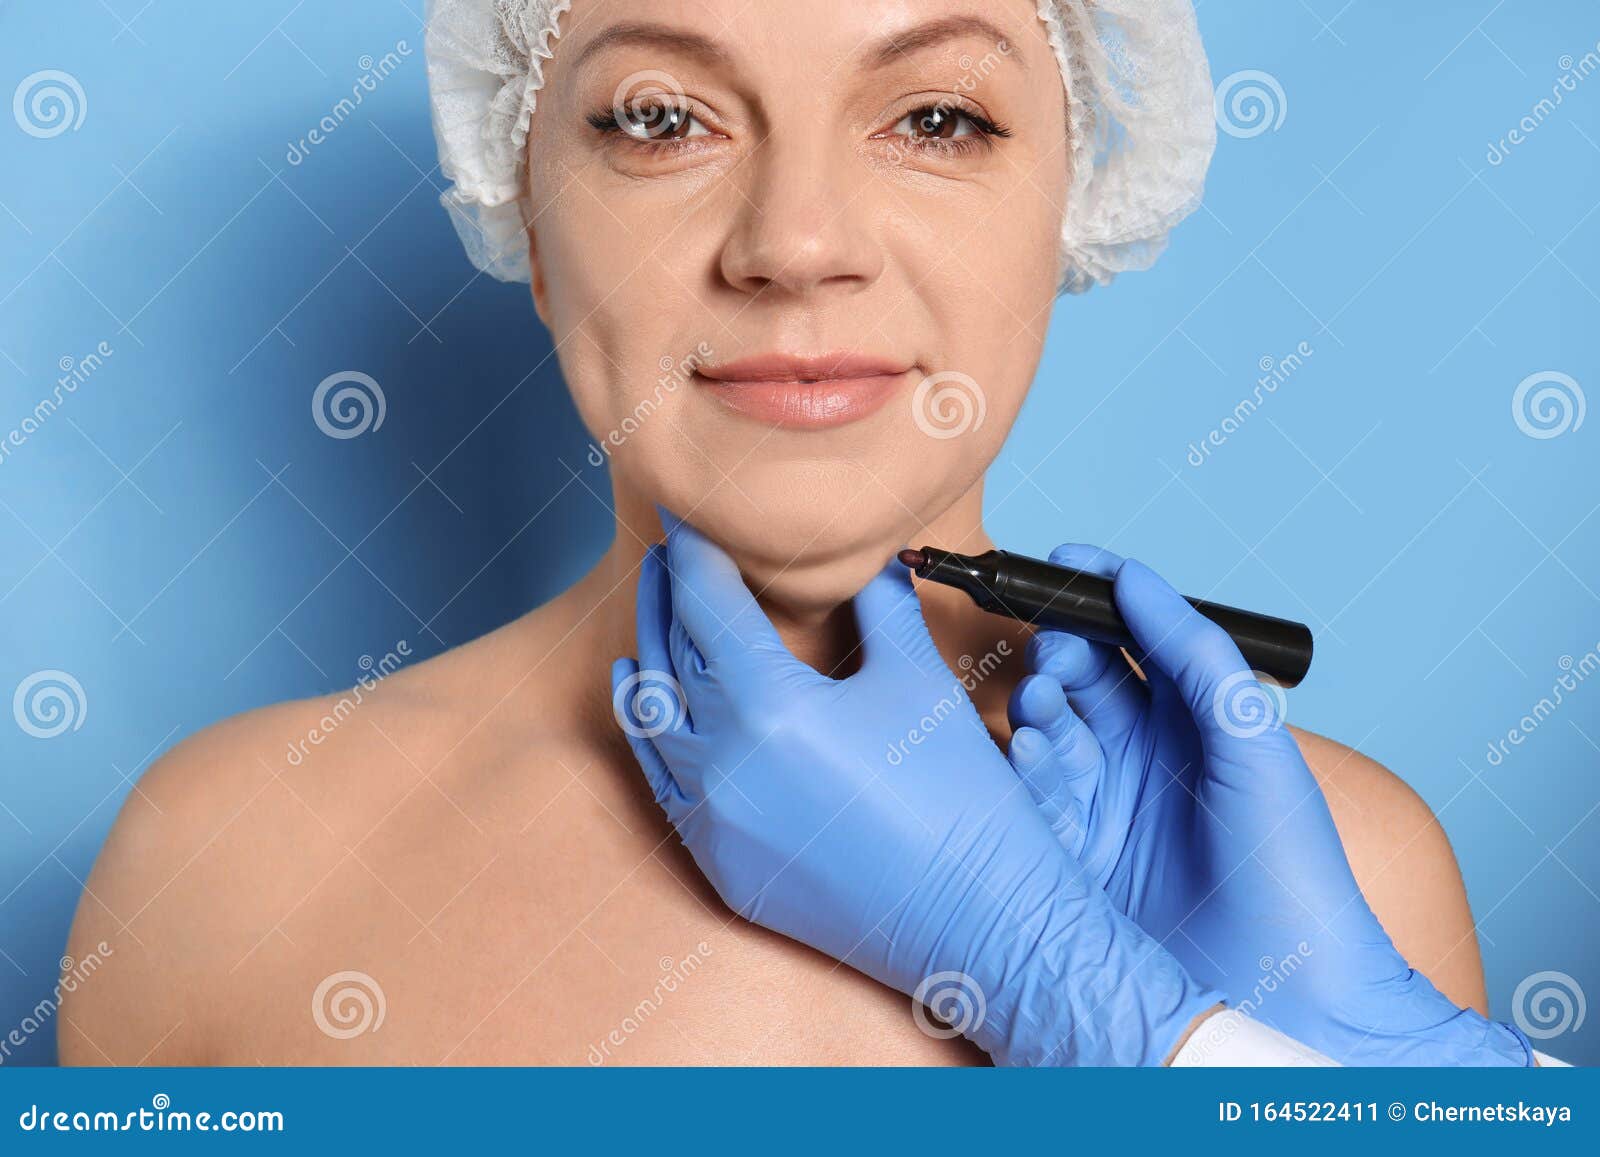 surgeon with marker preparing woman for operation against background. double chin removal